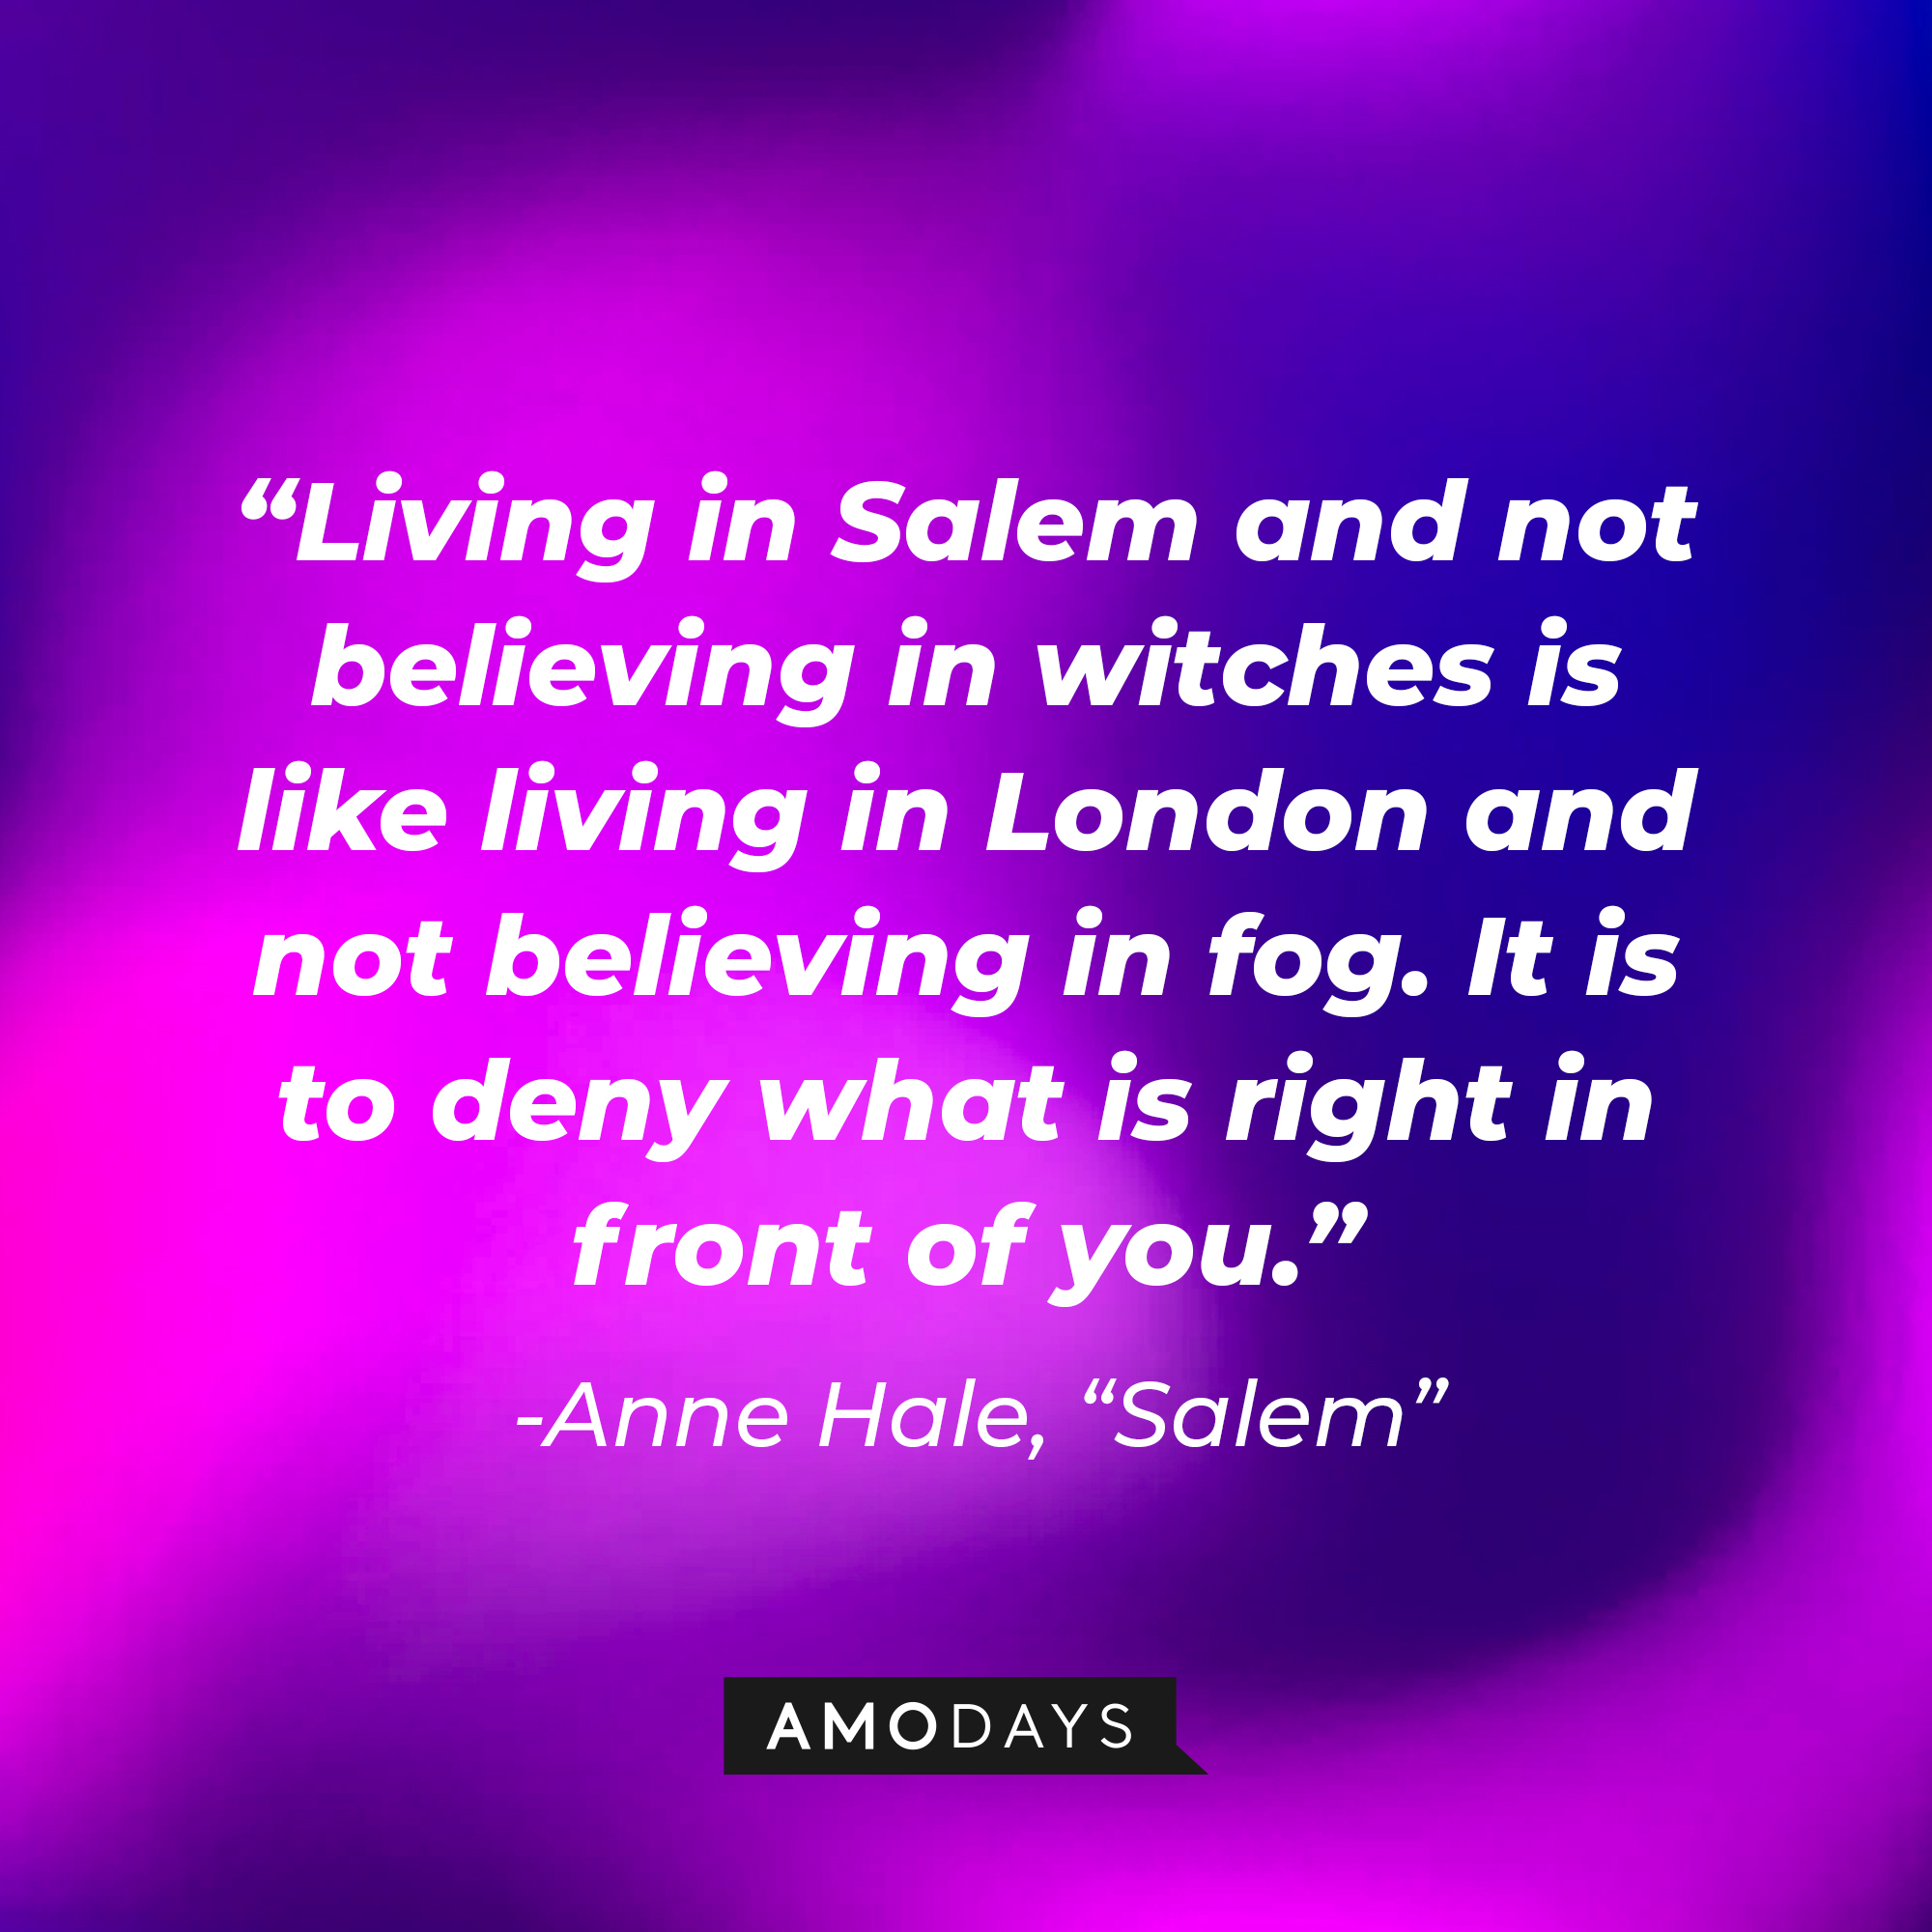 Anne Hale's quote: "Living in Salem and not believing in witches is like living in London and not believing in fog. It is to deny what is right in front of you." | Source: Amodays